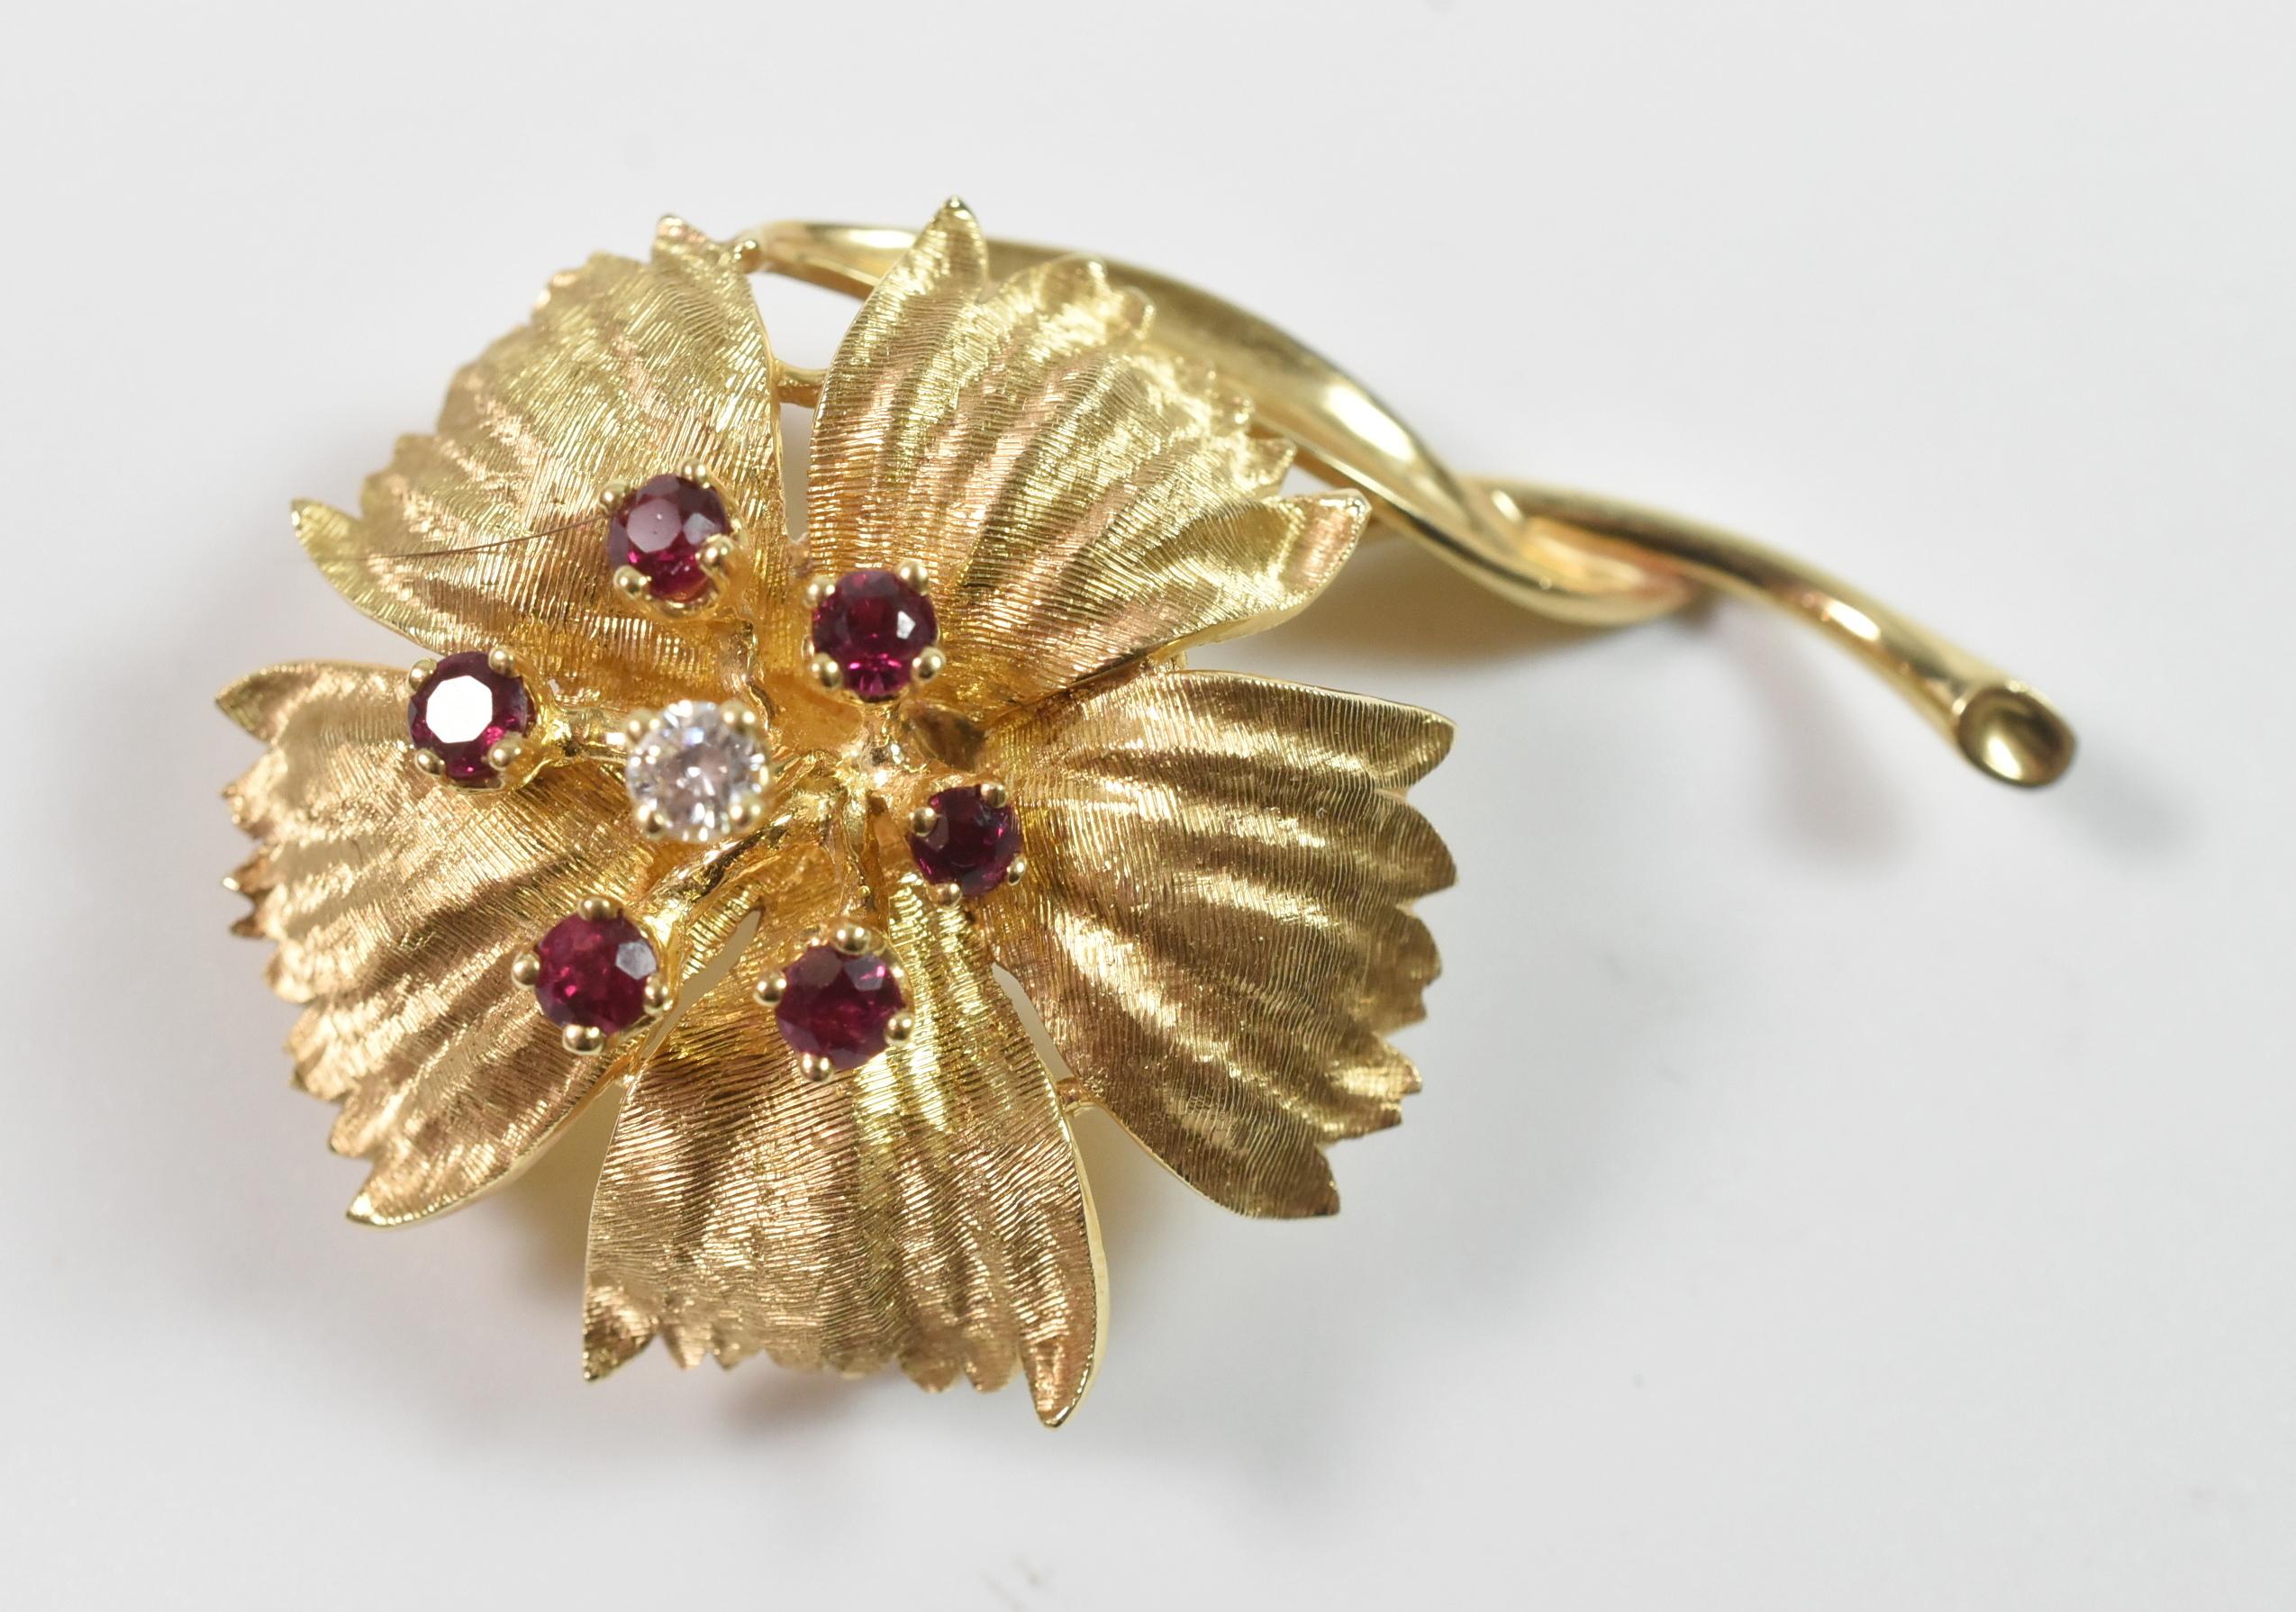 North American Dan Frere 14K Yellow Gold Floral Pin with Diamond and Rubies